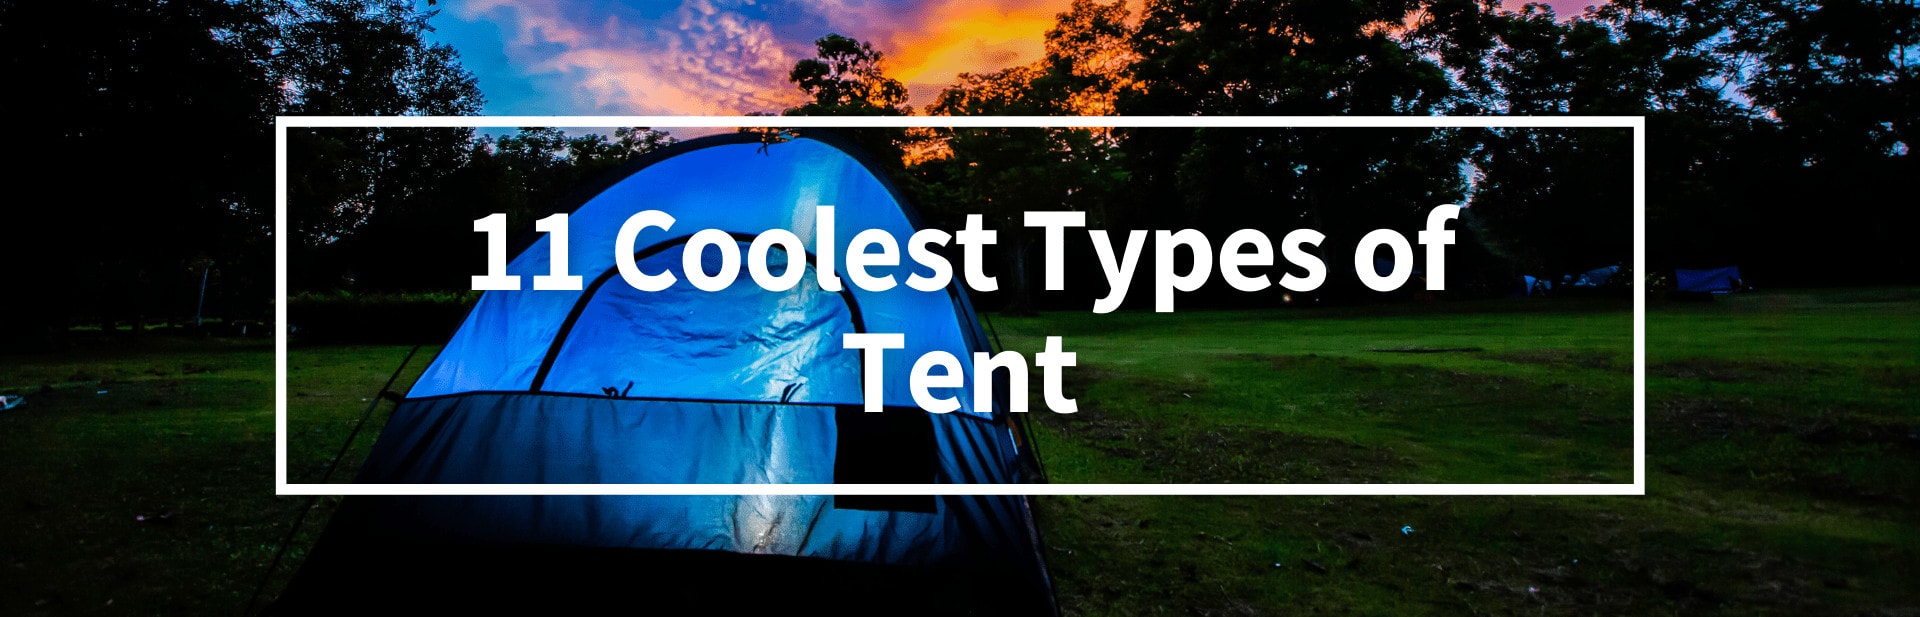 11 Coolest Types of Tents